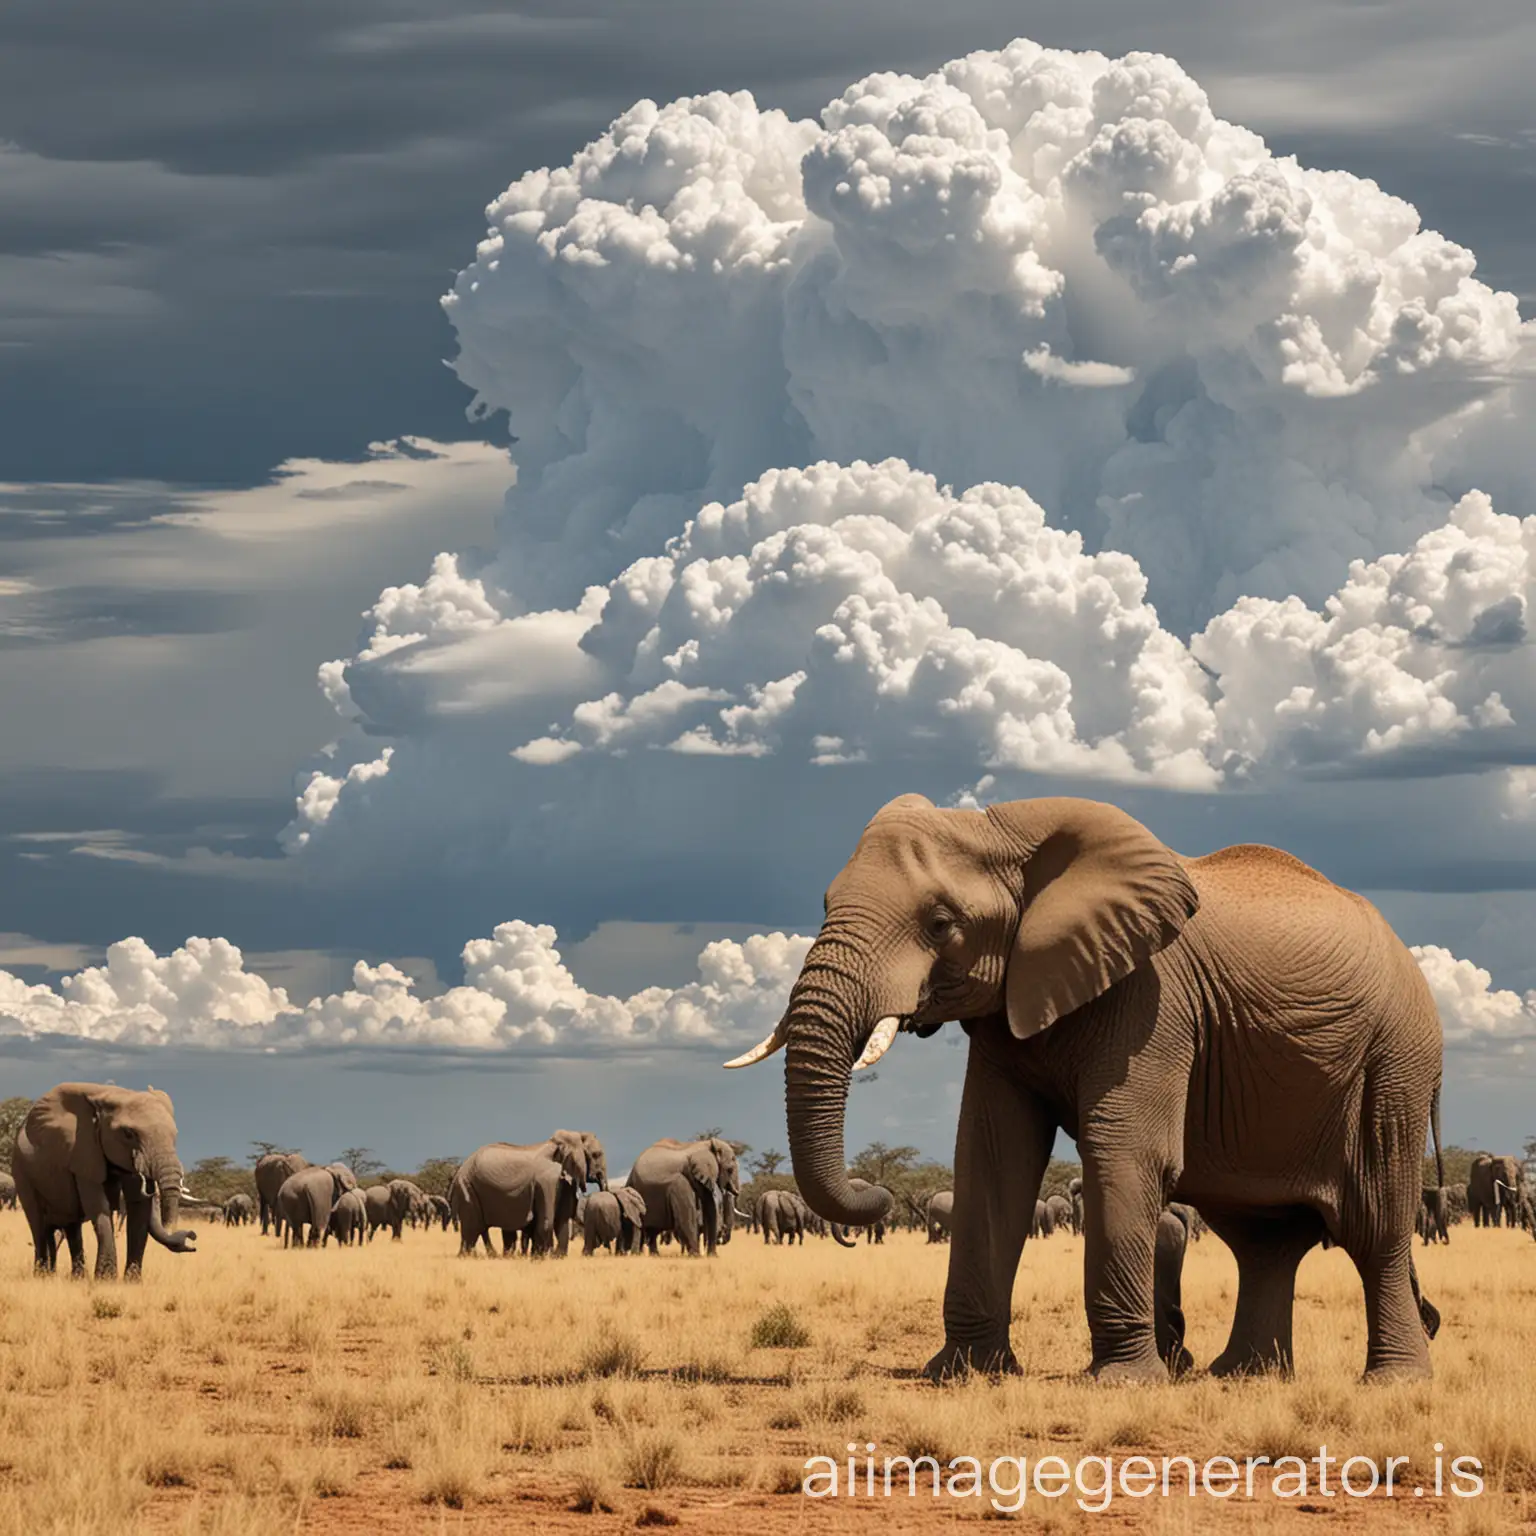 The average cloud weighs about as much as 100 elephants.